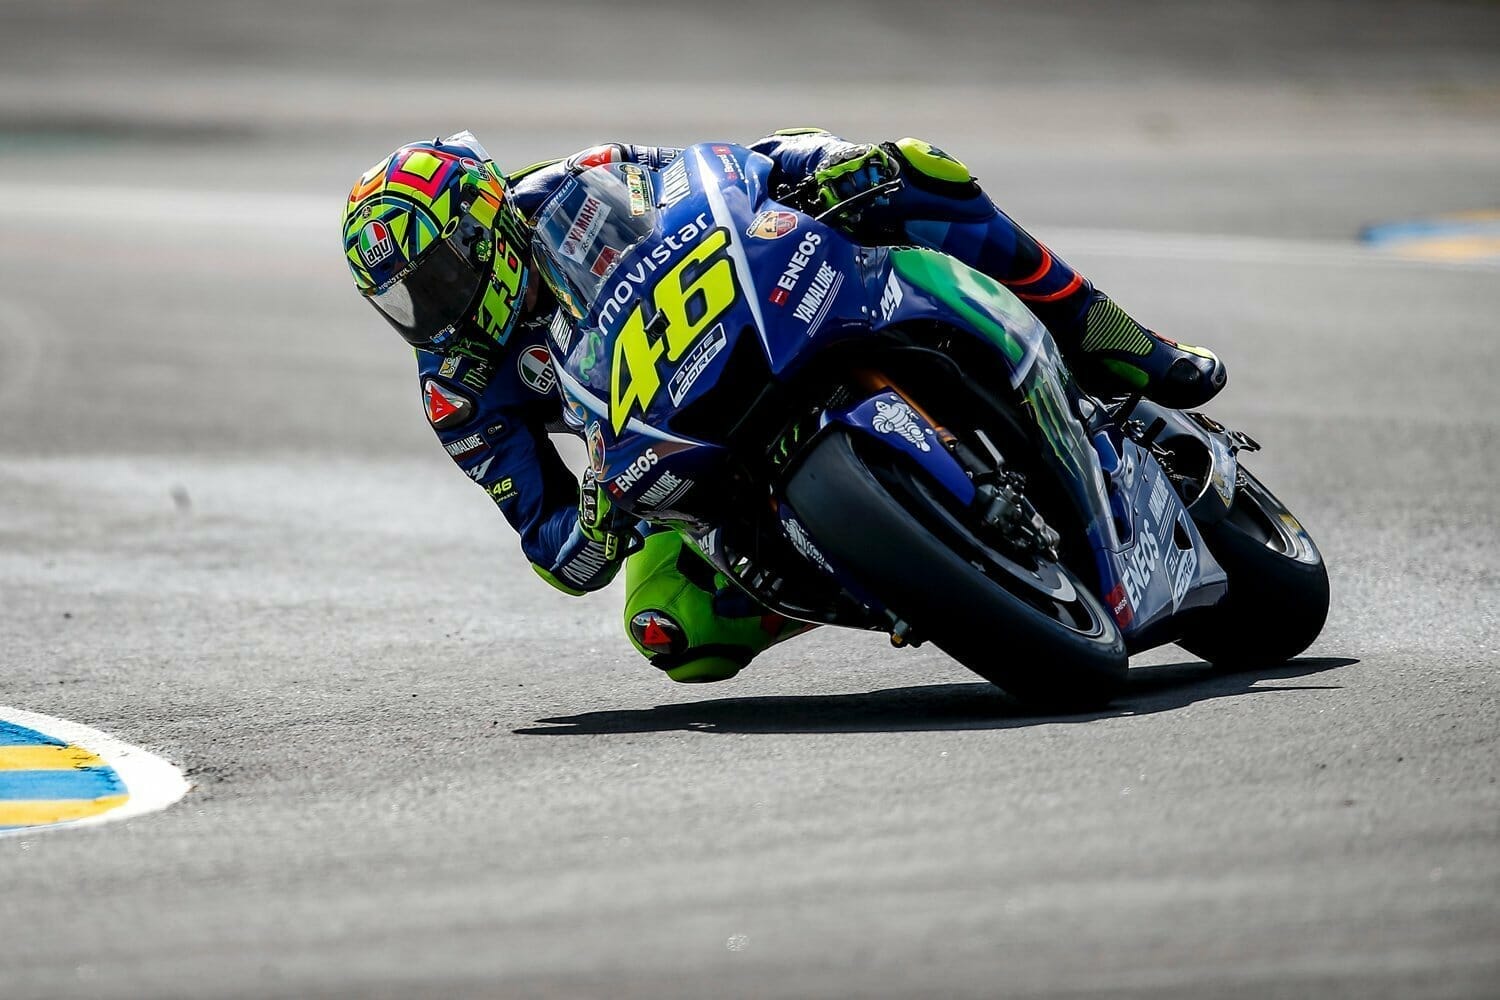 Valentino Rossi after motocross accident in the hospital